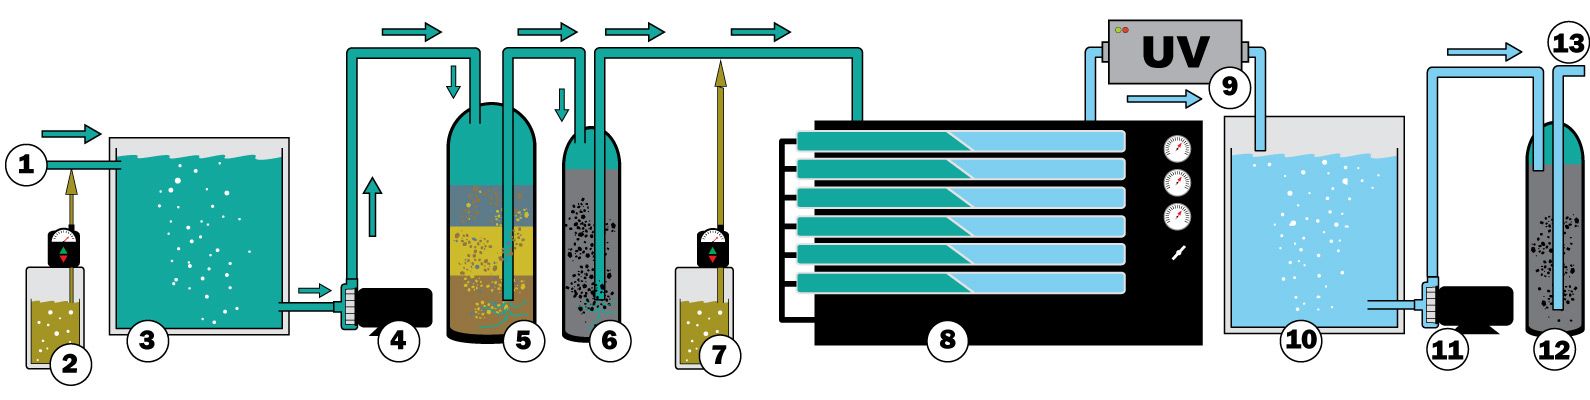 commercial seawater watermaker system process schematic diagram